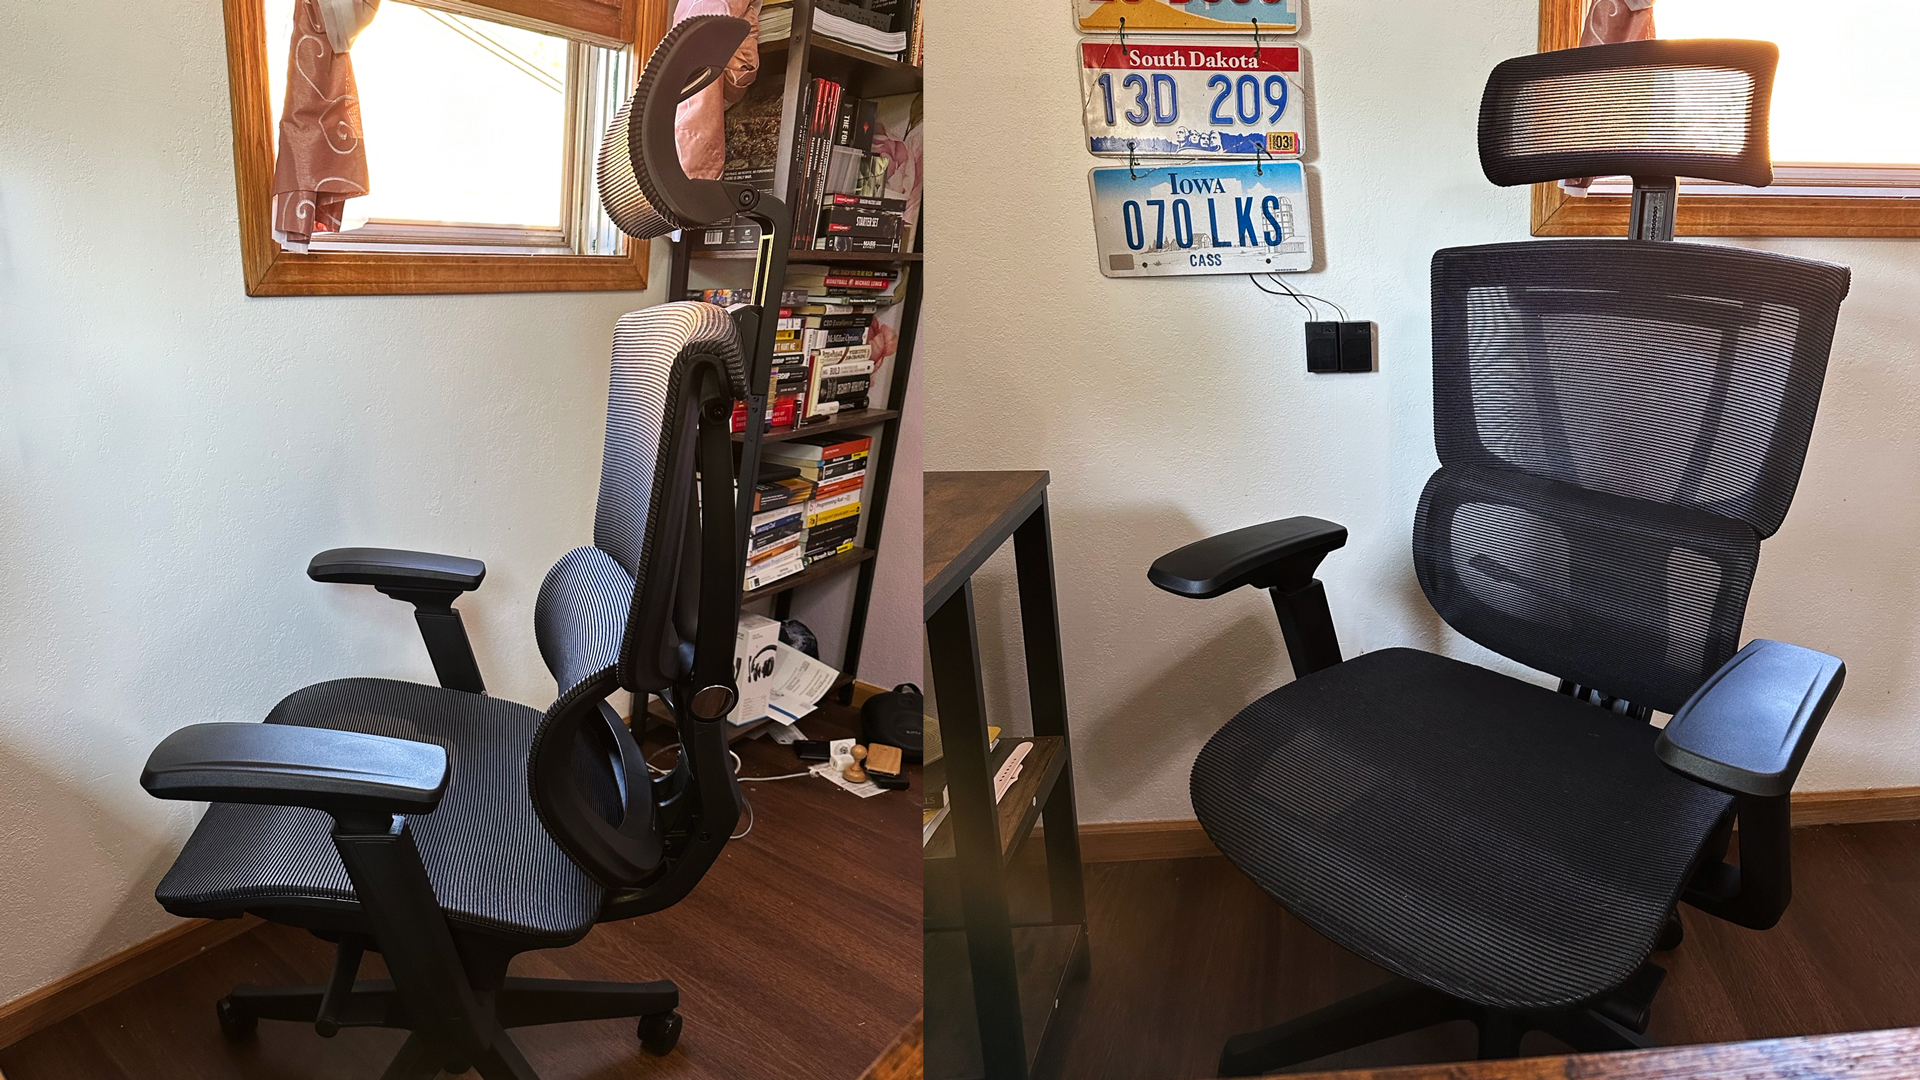 Stay Cool and Comfortable with FlexiSpot C7 Ergonomic Chair - Mesh Cushion for Enhanced Airflow